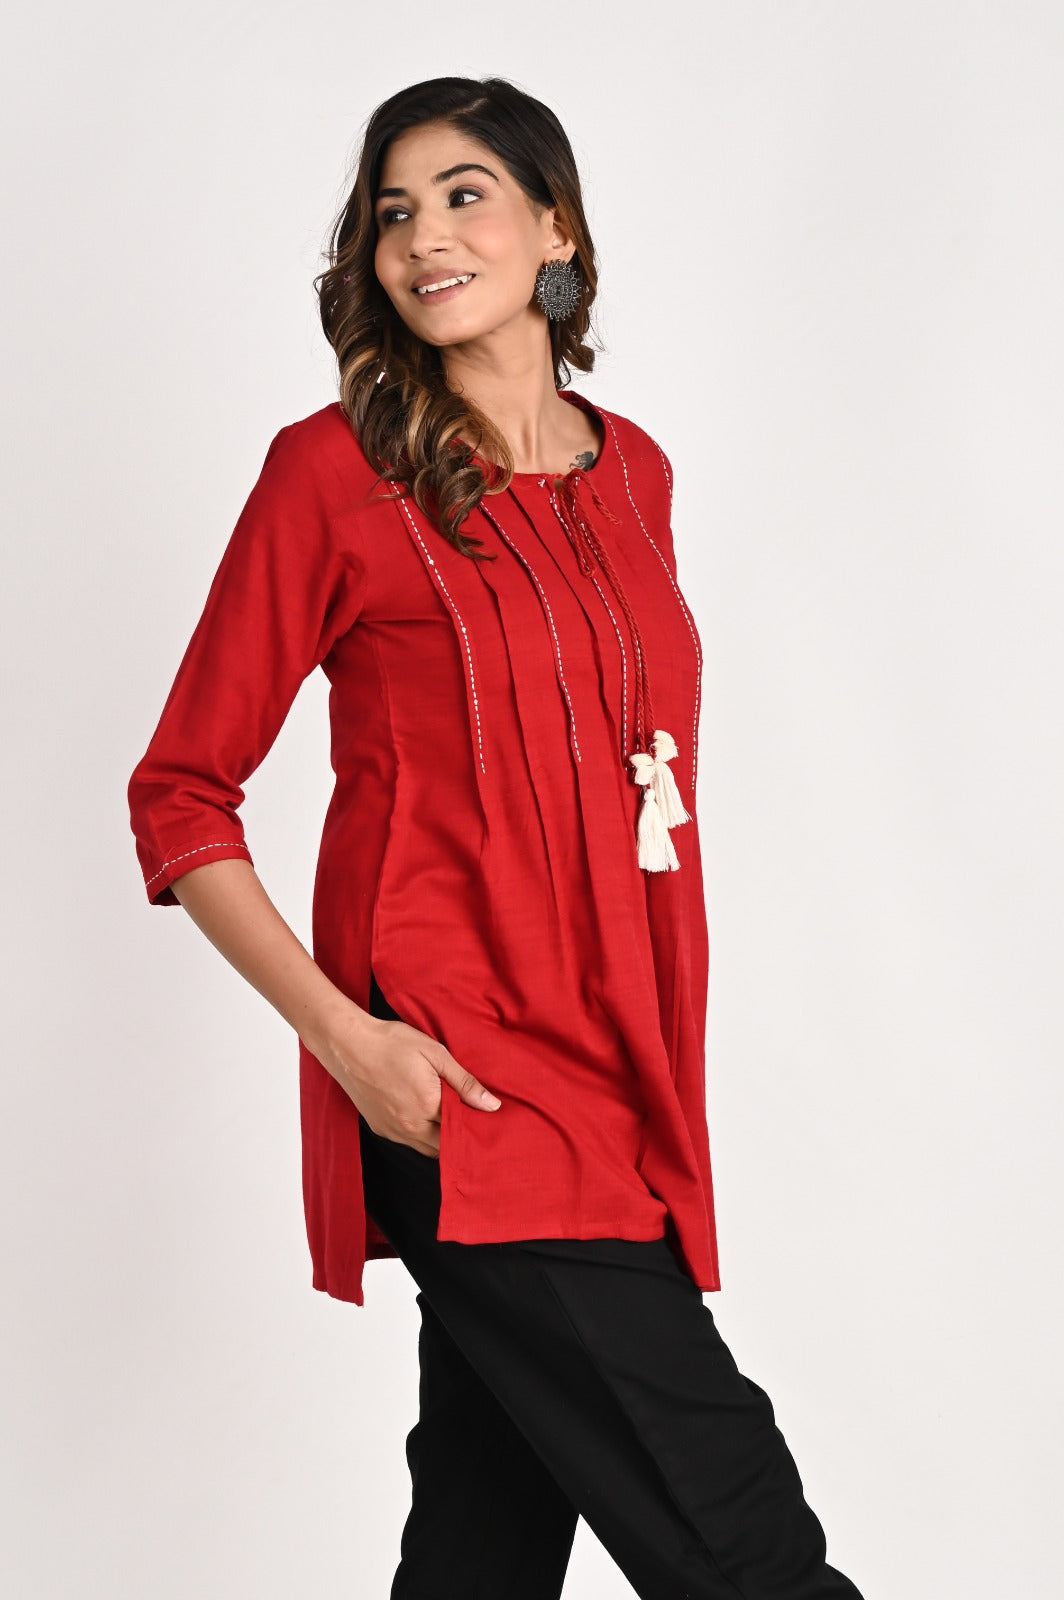 Pleated Red Top